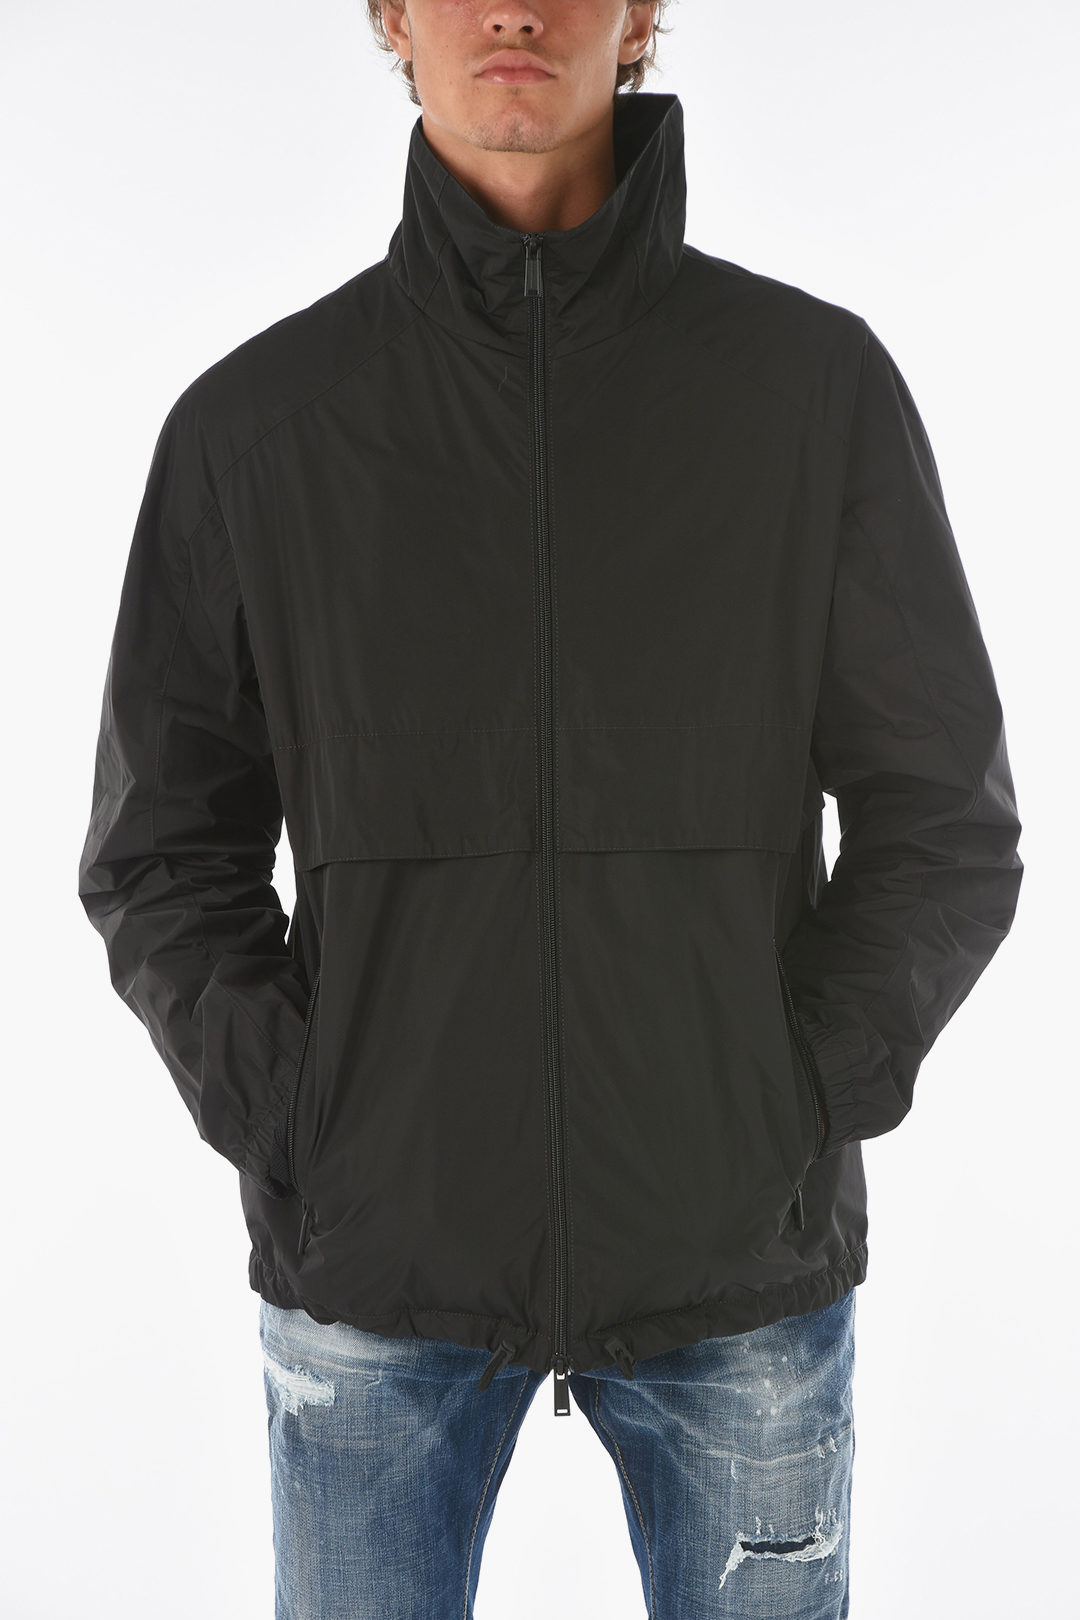 Dsquared2 Solid Color Windbreaker with Hood men - Glamood Outlet